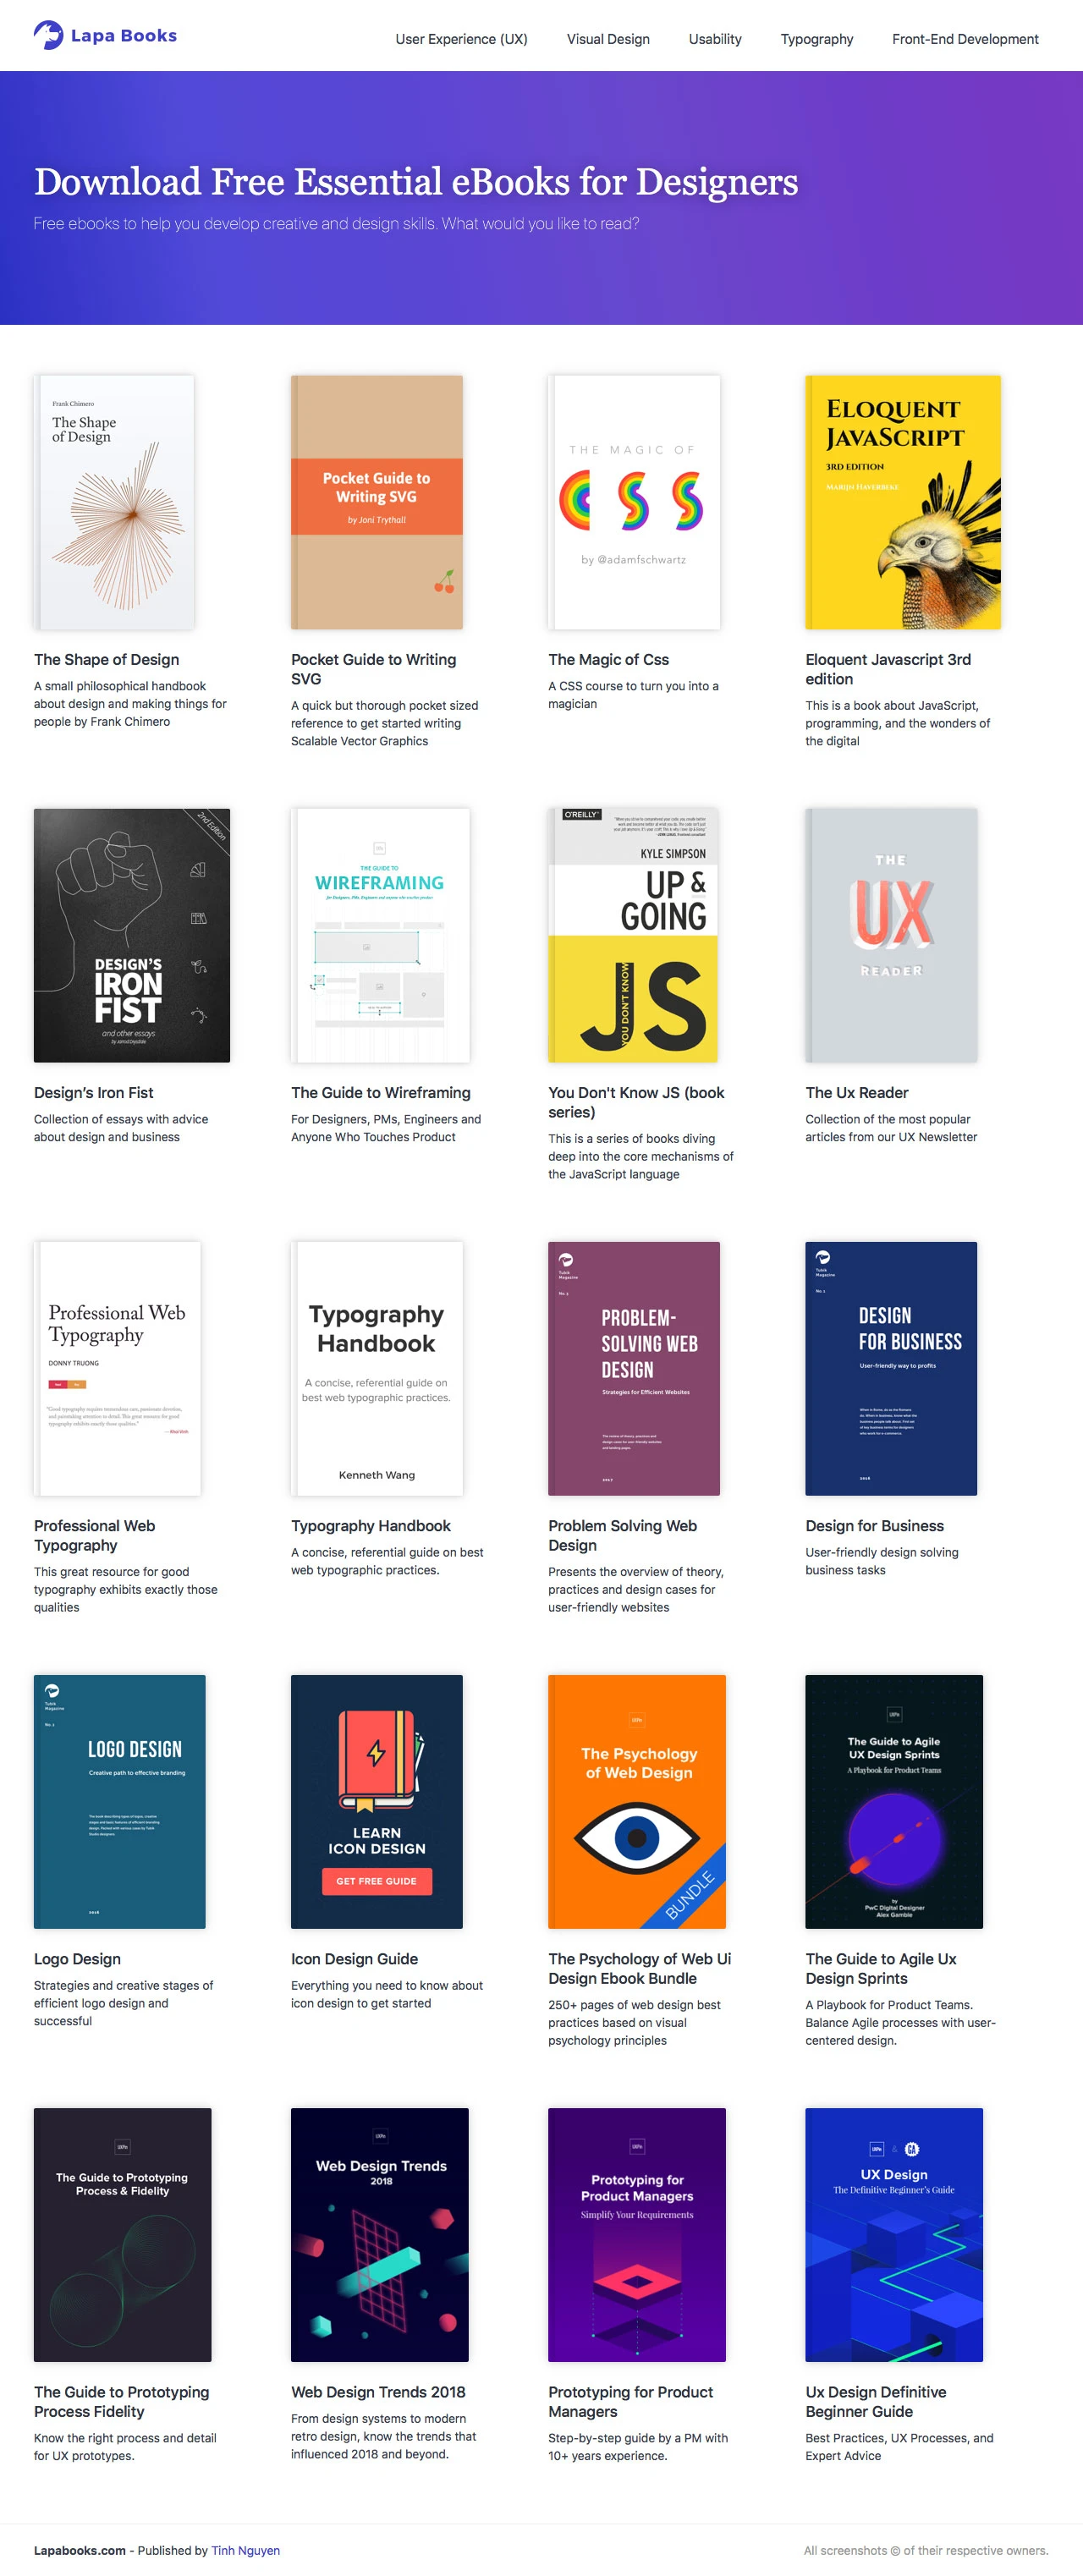 Lapa Books Landing Page Example: Download Free Essential eBooks for Designers. Free ebooks to help you develop creative and design skills. What would you like to read?